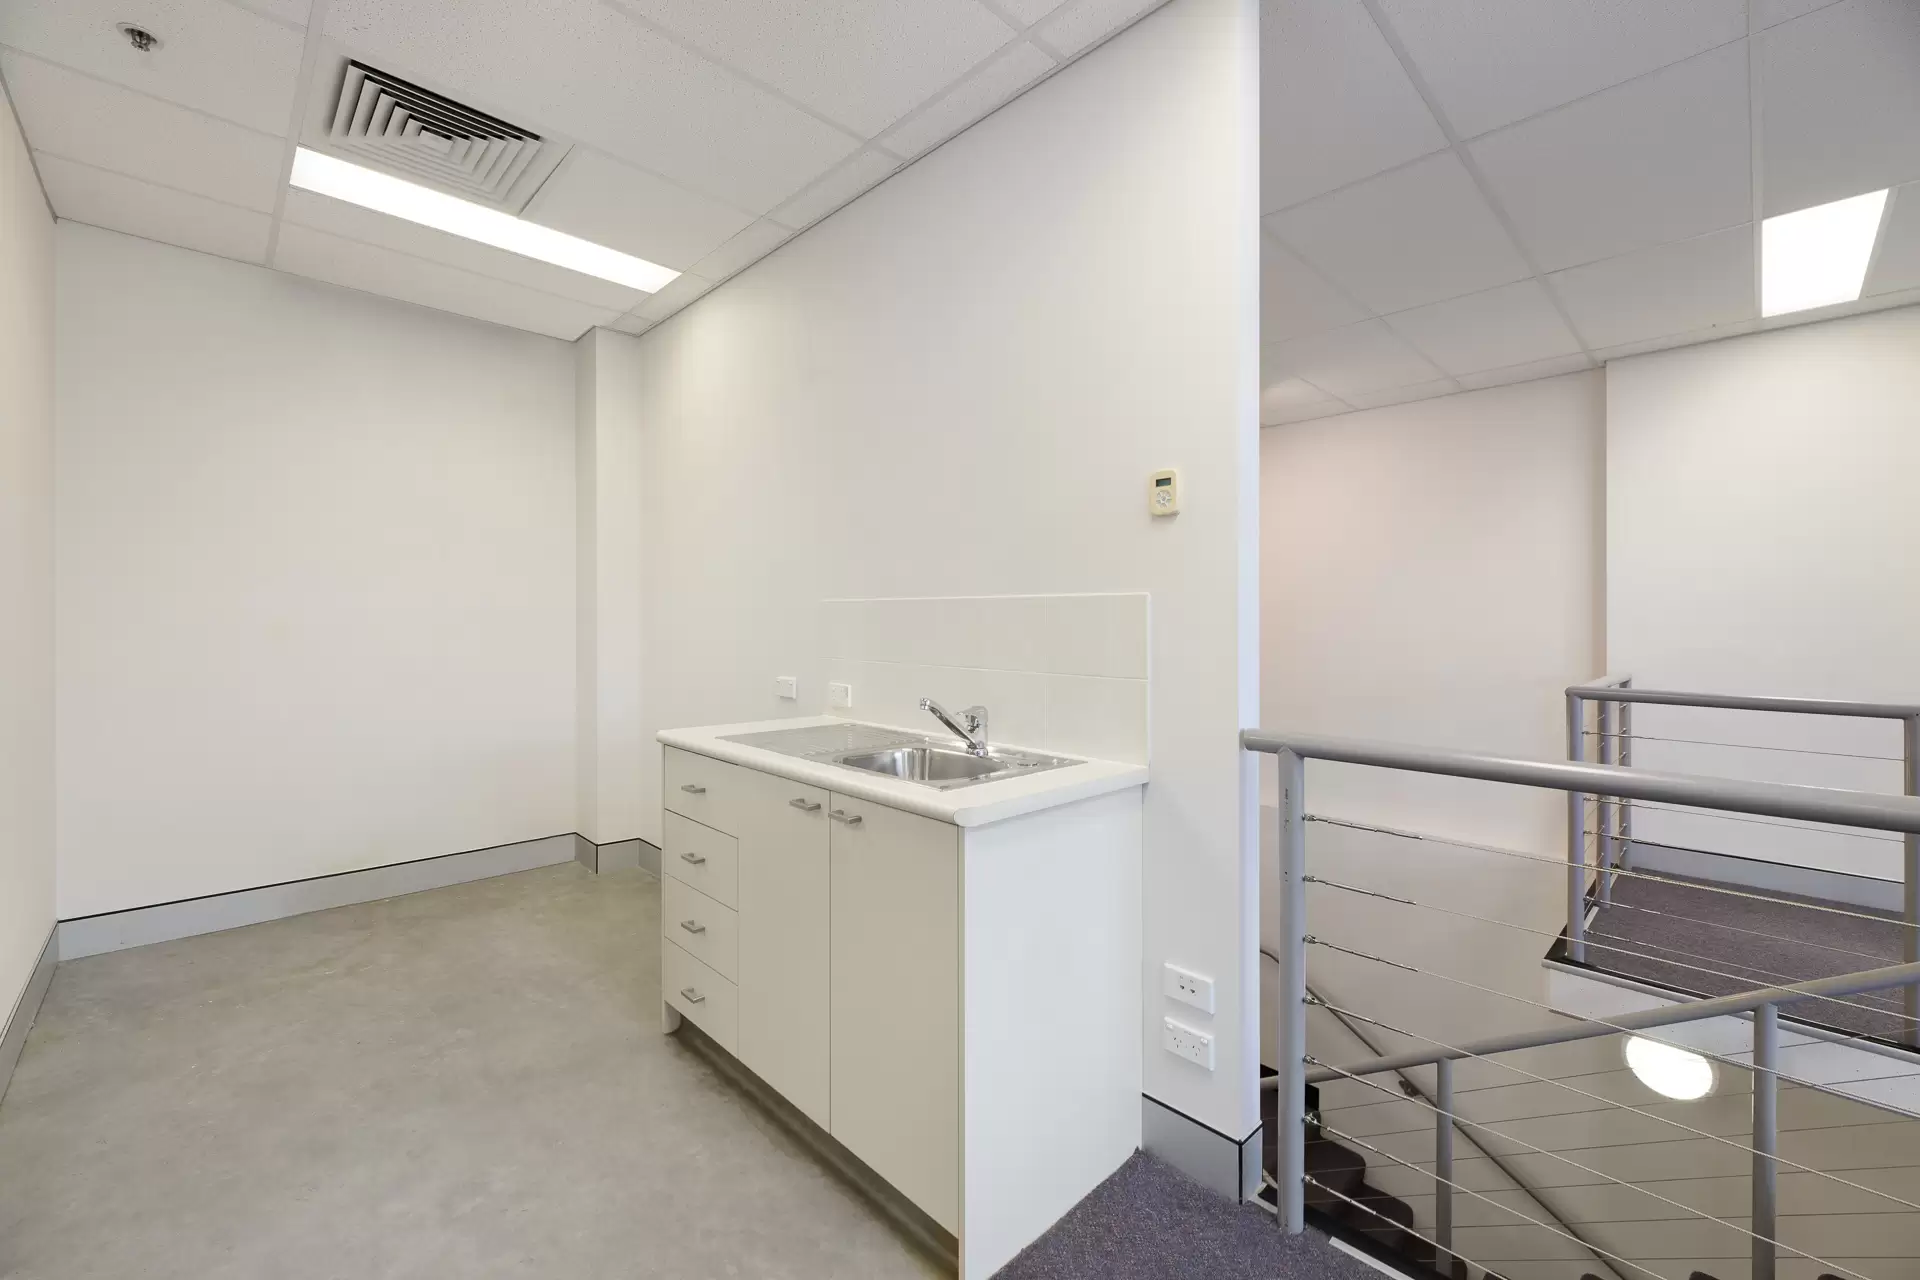 Unit 4/25 Gibbes Street, Chatswood For Lease by Shead Property - image 1